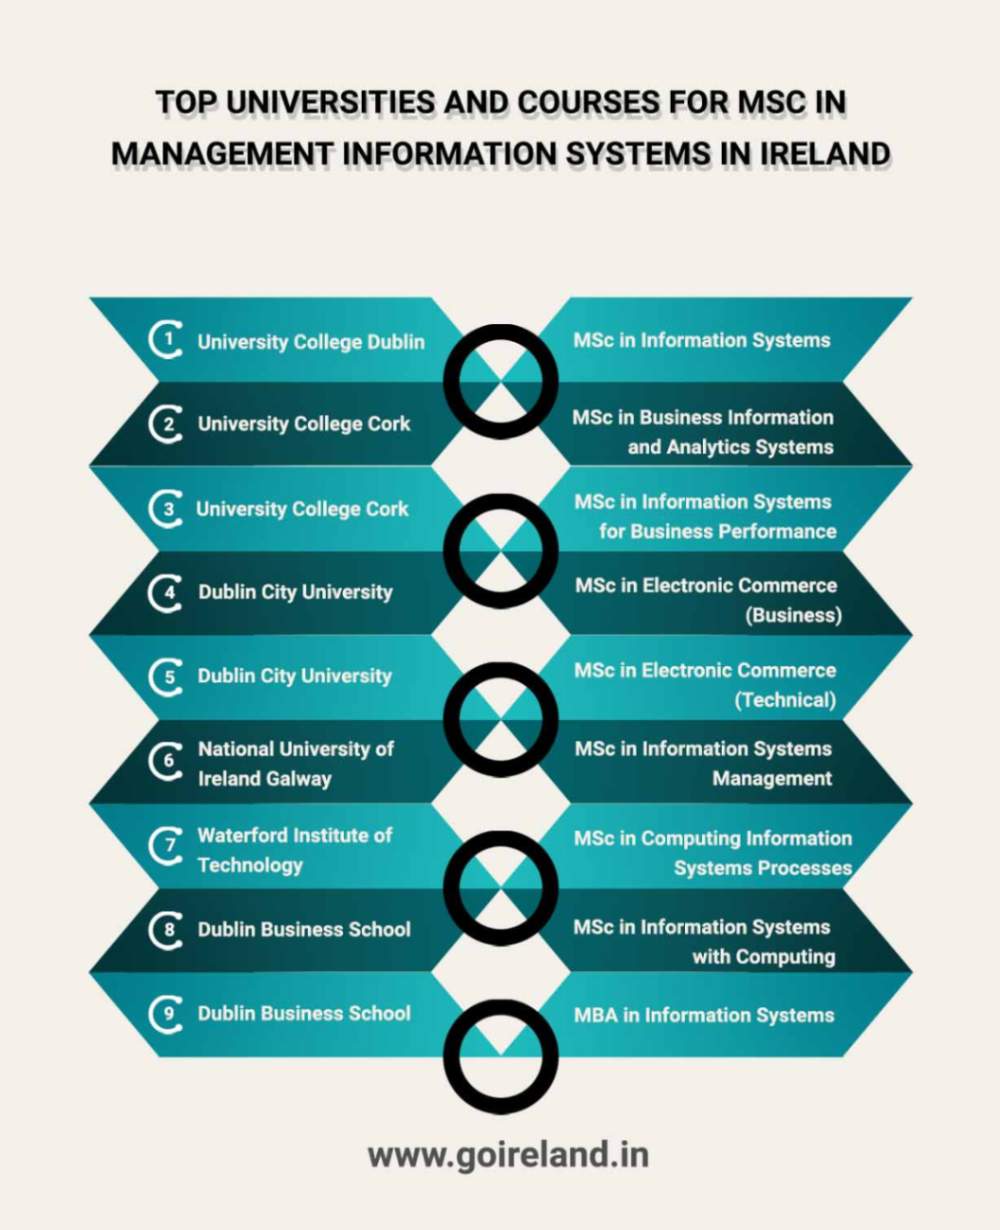 Top Universities and Courses for MSc in Management Information Systems in Ireland